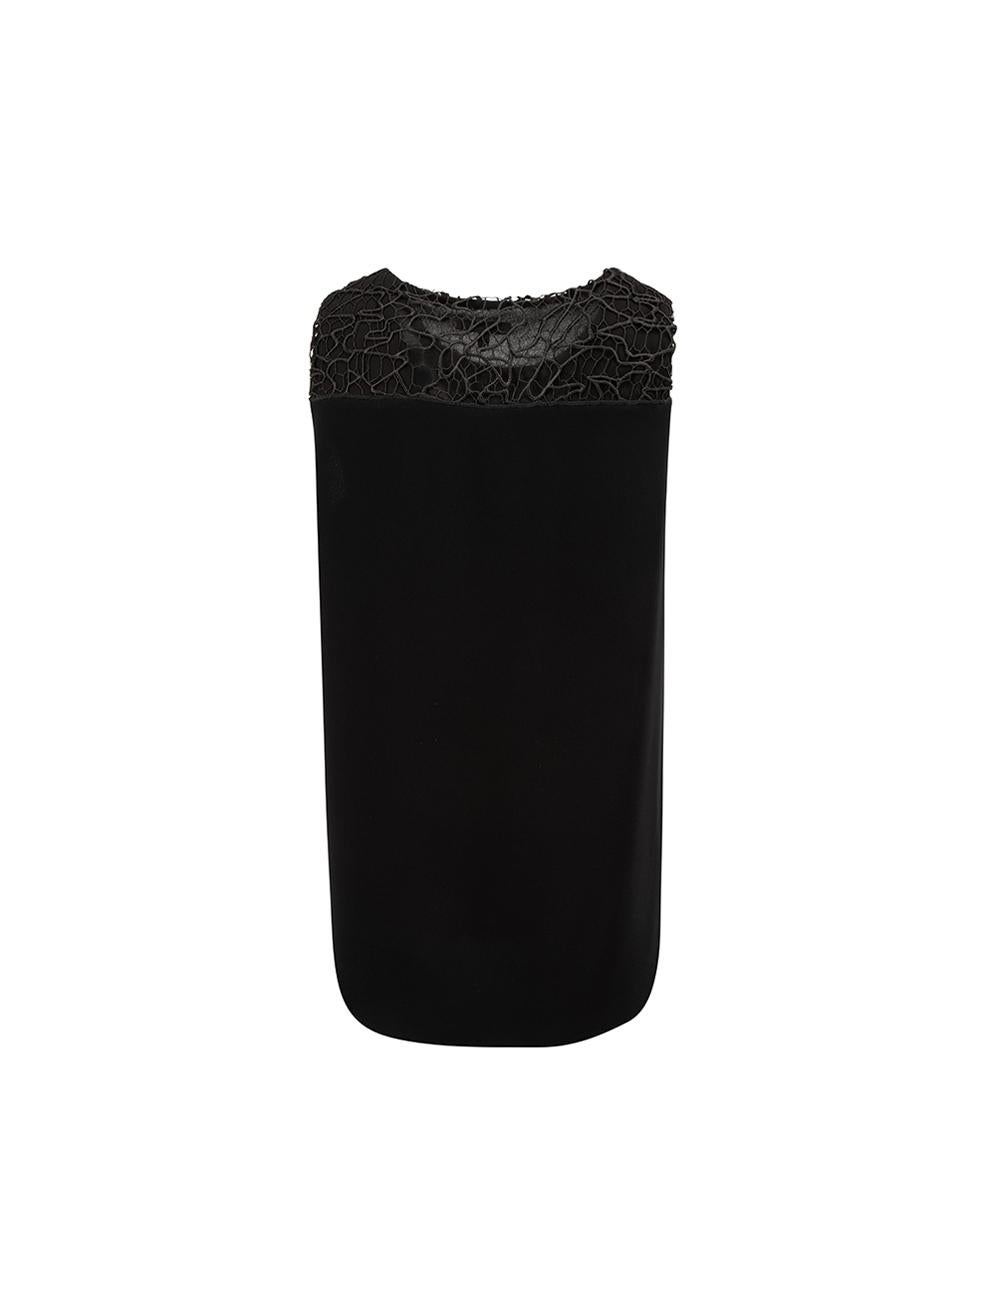 Rag & Bone Black Lace Panel Sleeveless Top Size M In Excellent Condition For Sale In London, GB